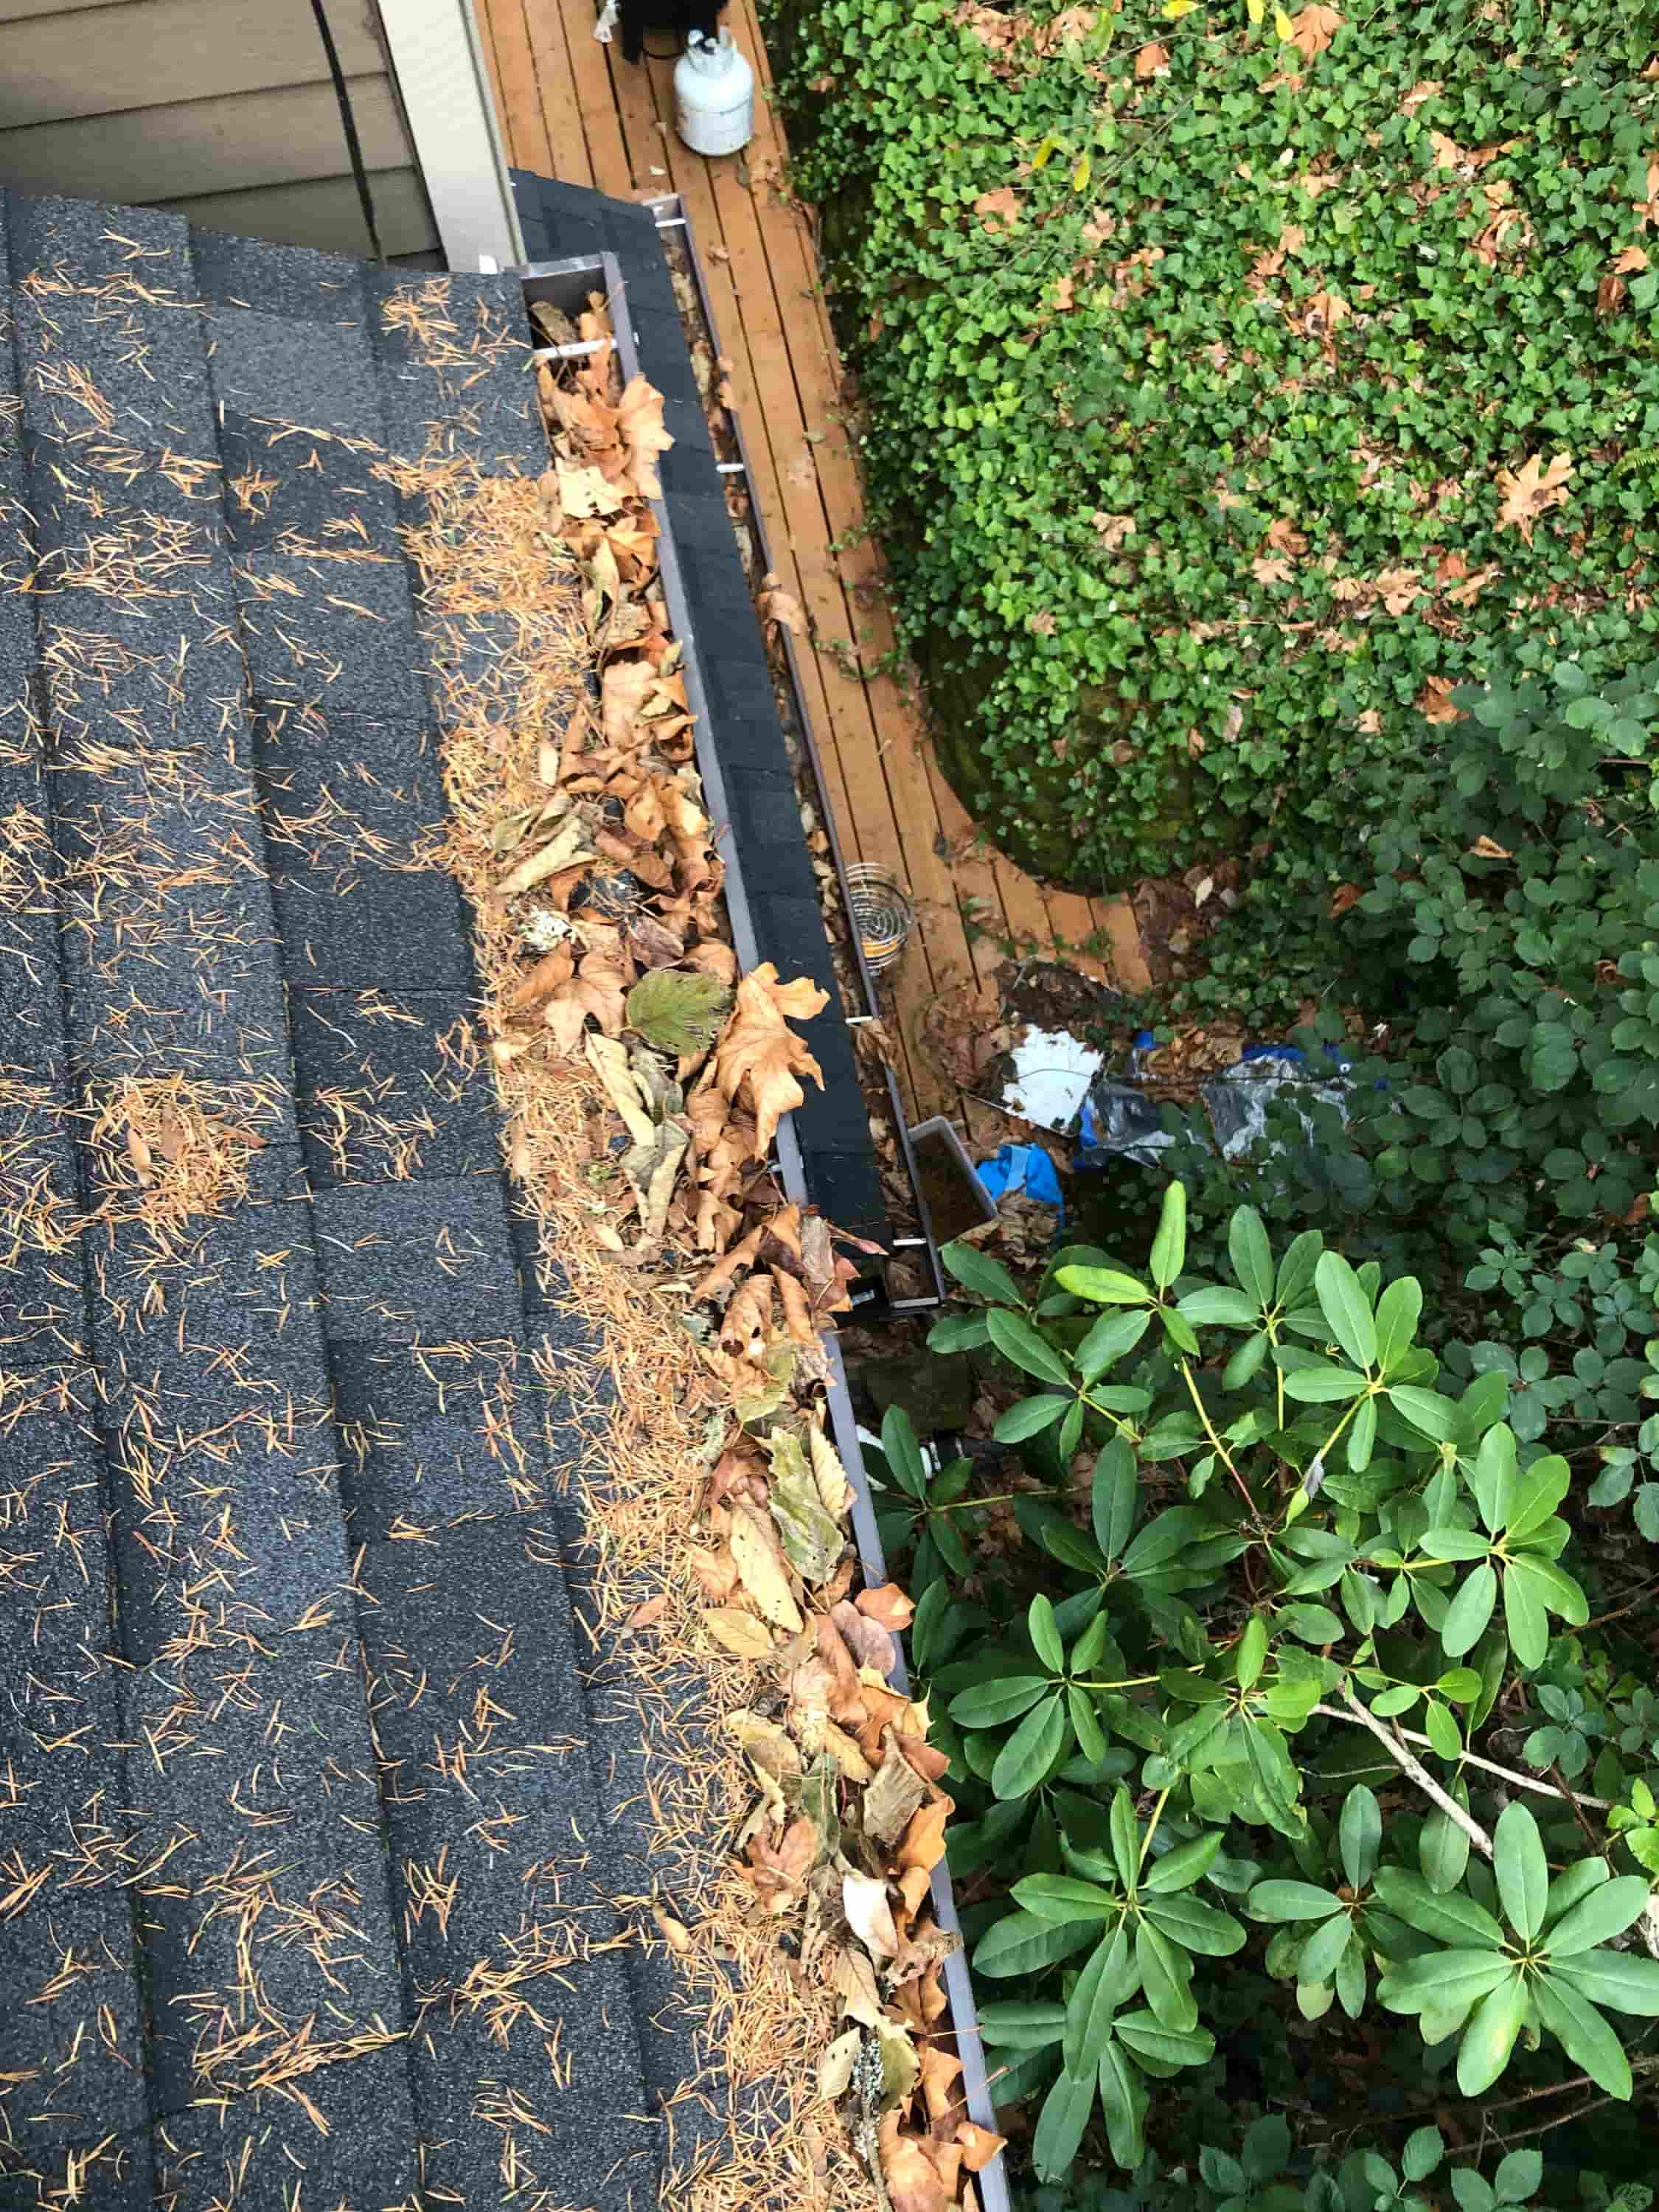 how to clean gutters by yourself